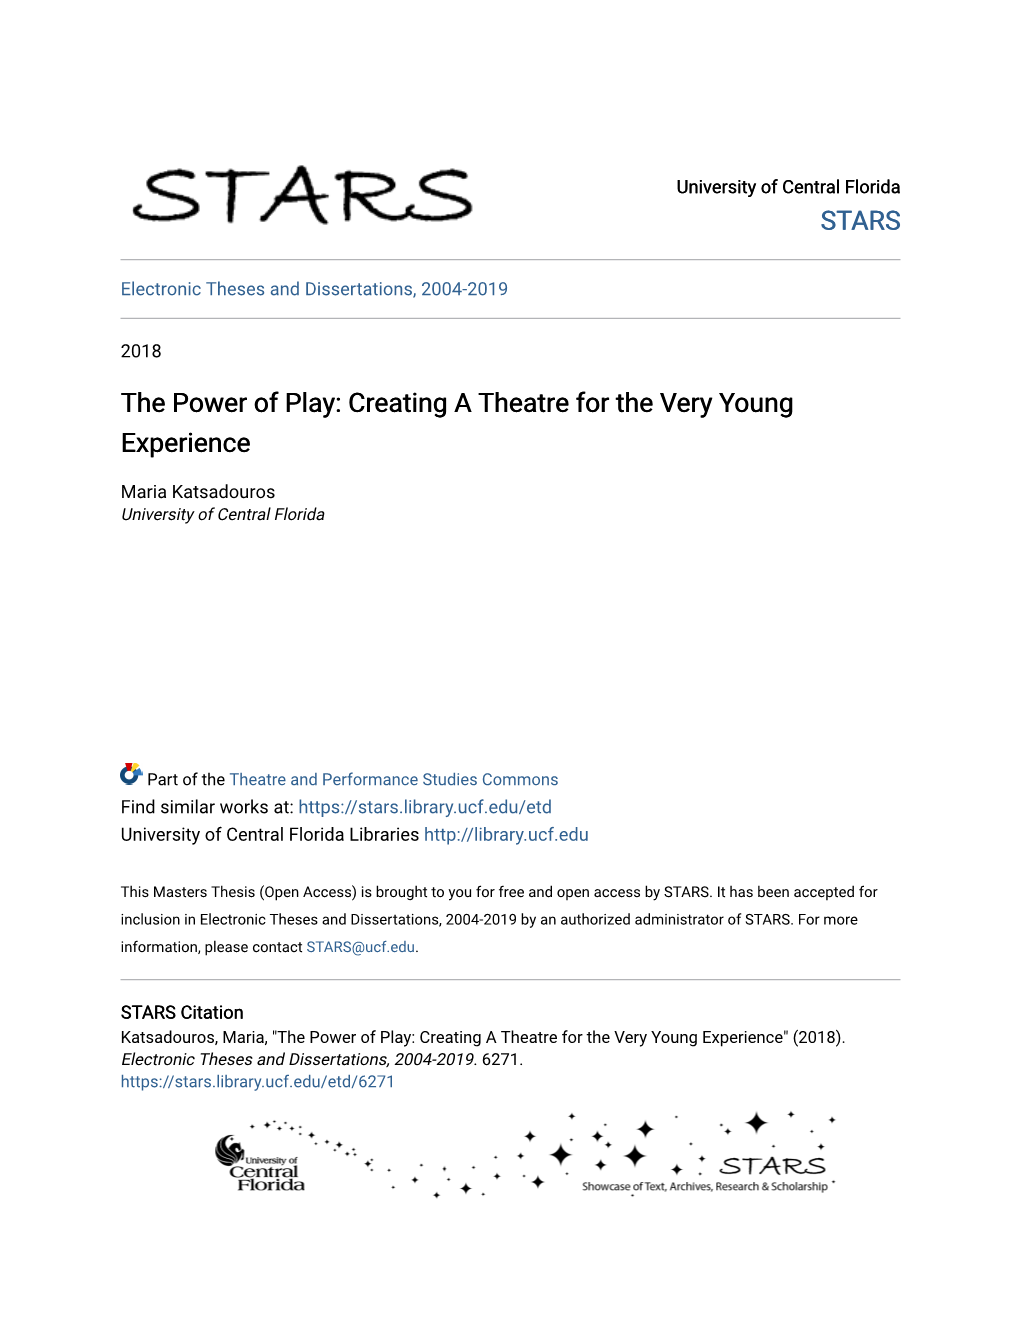 Creating a Theatre for the Very Young Experience